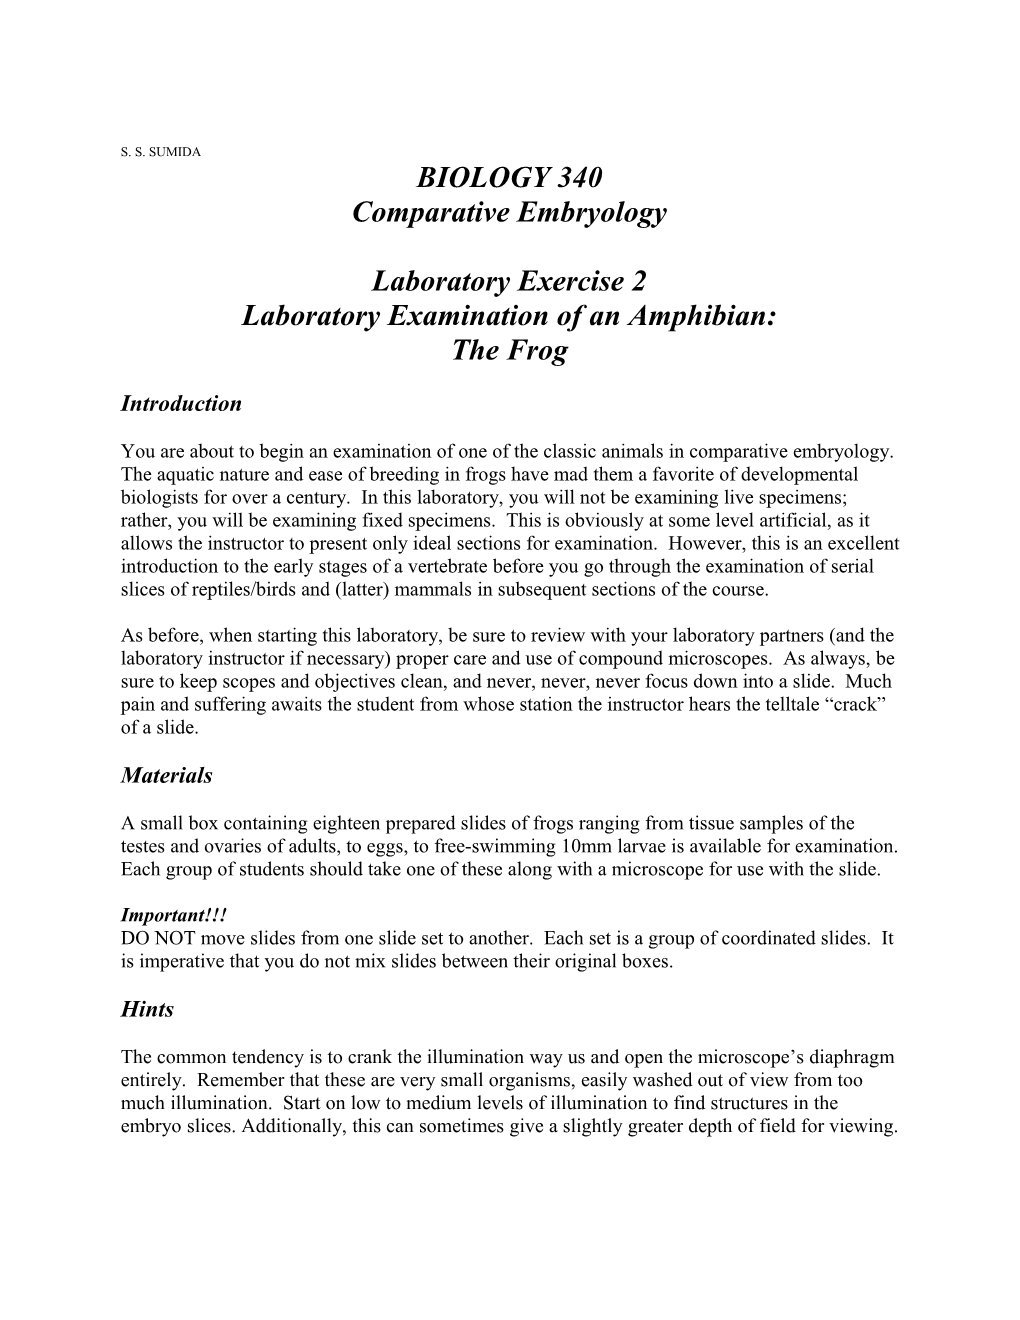 Biology 340, Comparative Embryology, Laboratory Exercise 2 Page 7